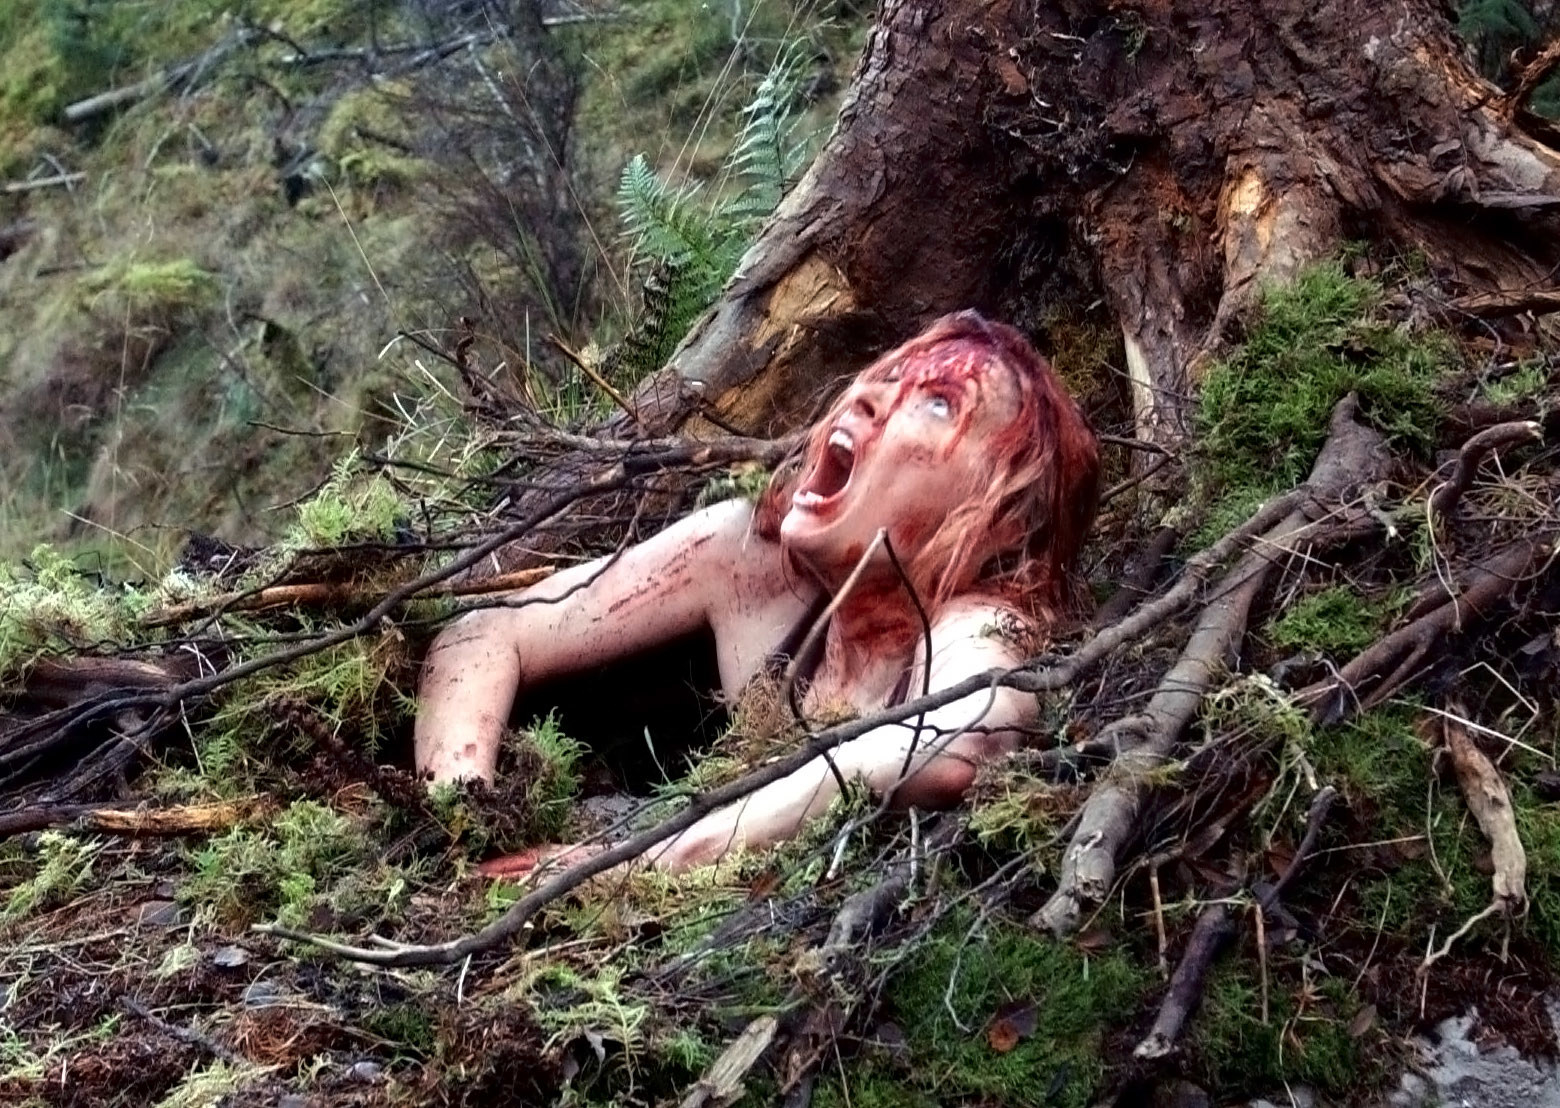 A woman screams while crawling out from under a tree